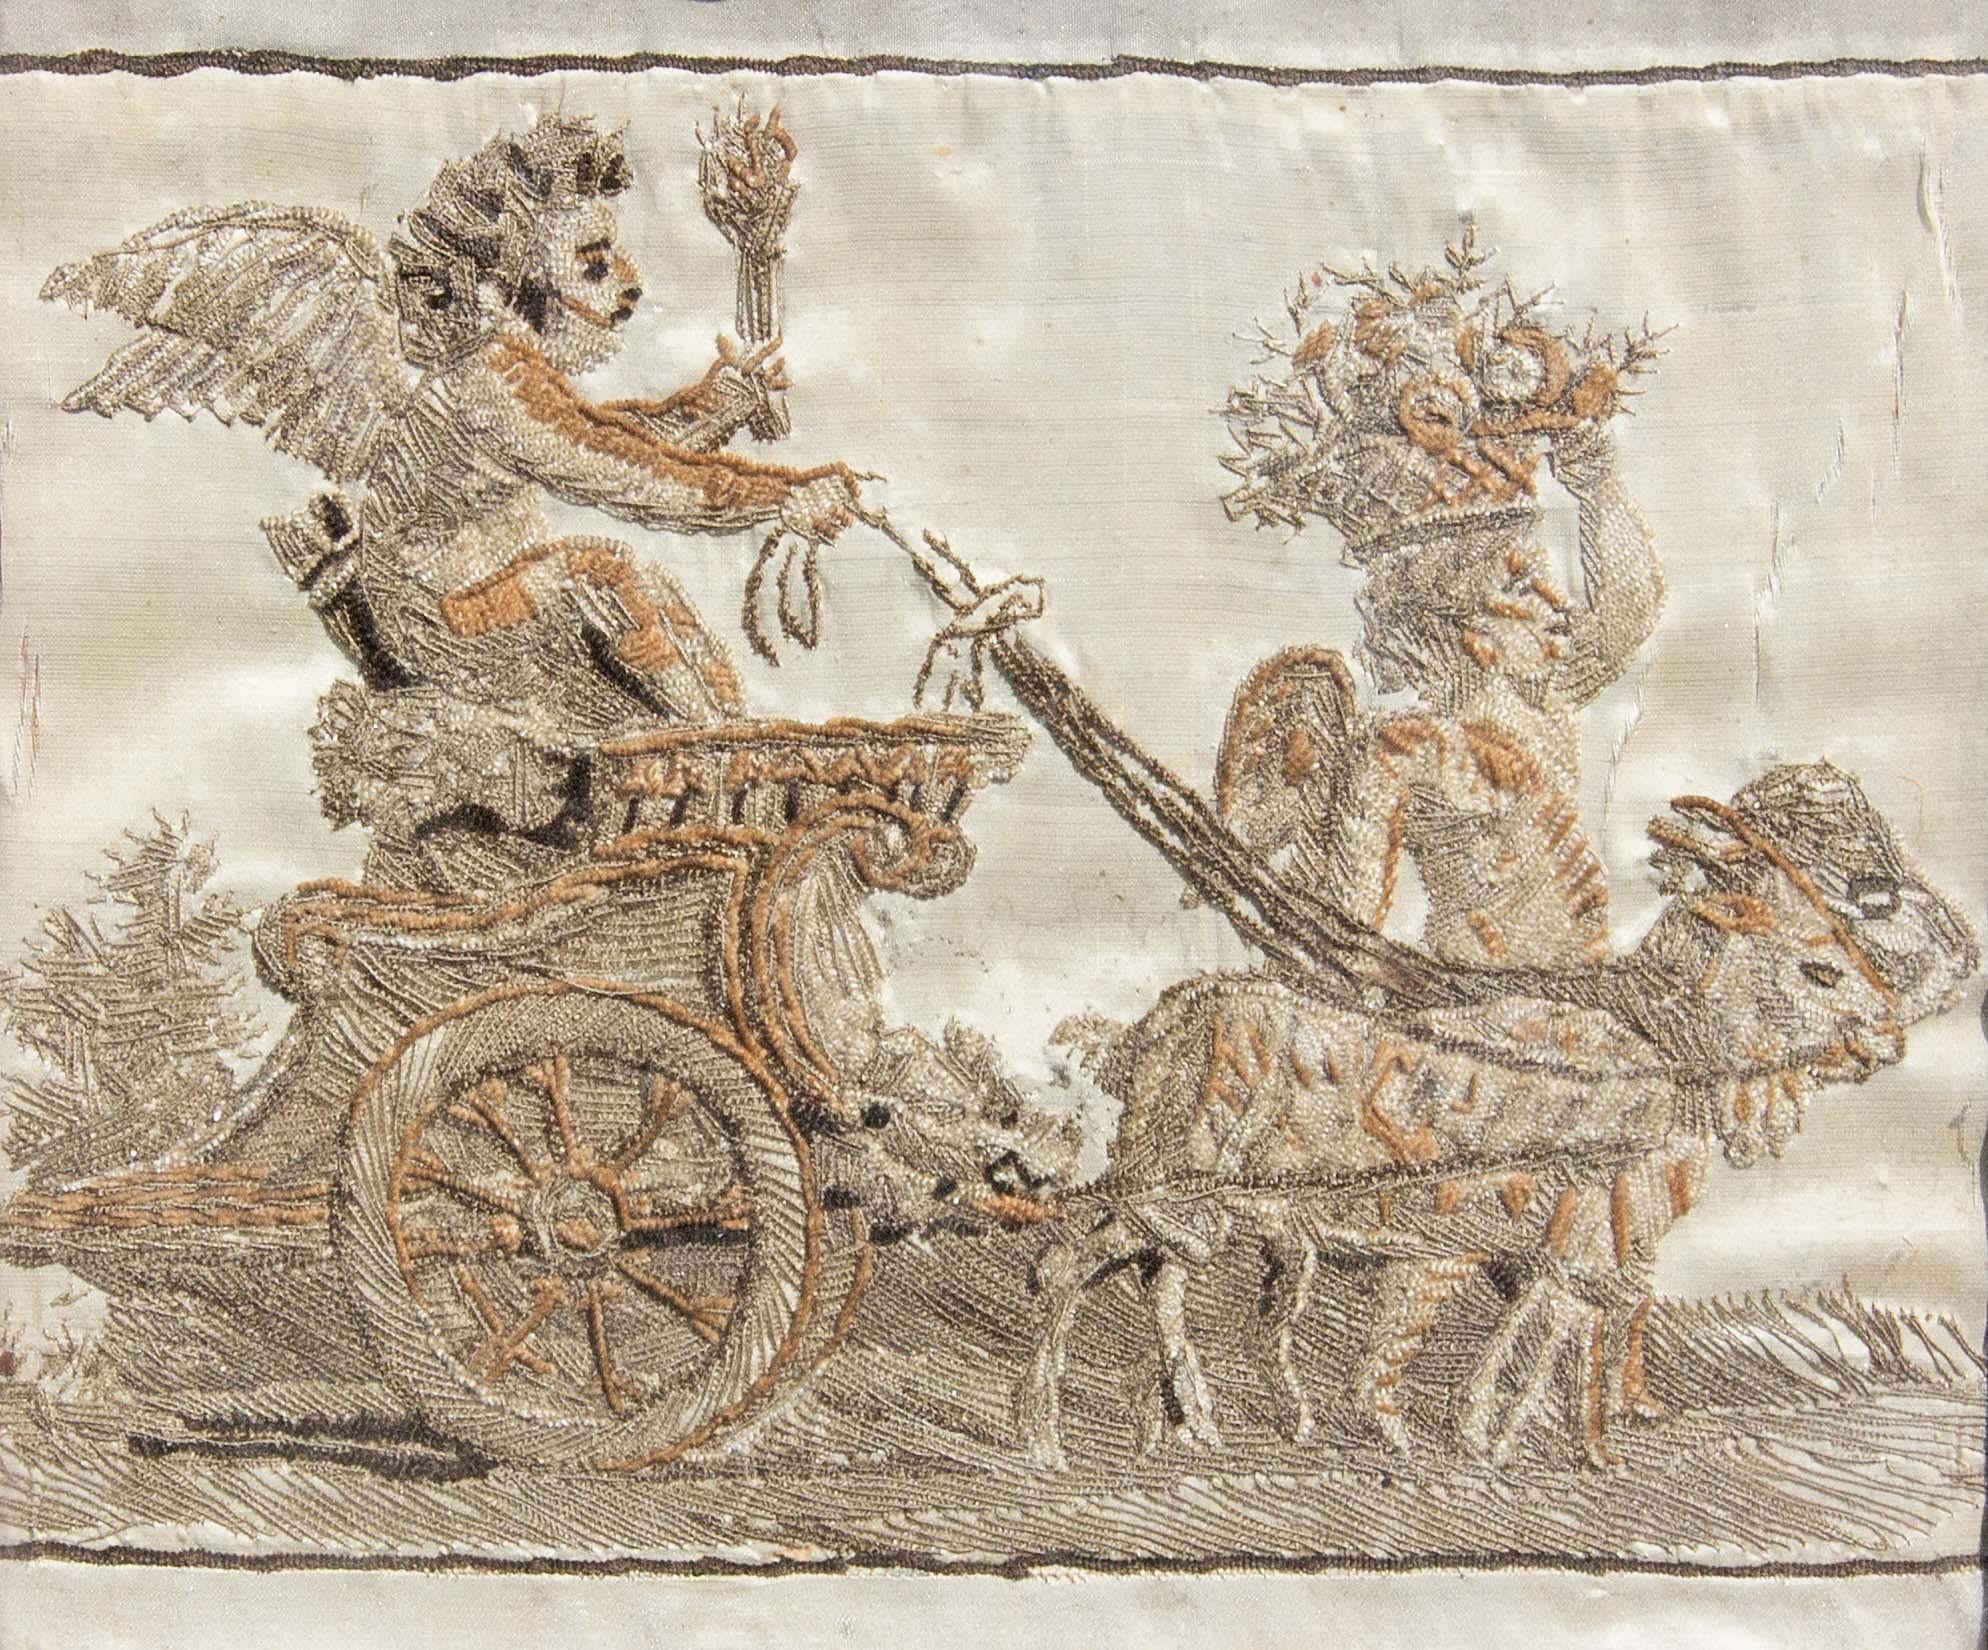 18th century Italian silk embroidery of cherub riding a chariot. In a carved wood and gesso 18th century Italian frame. Renaissance style.